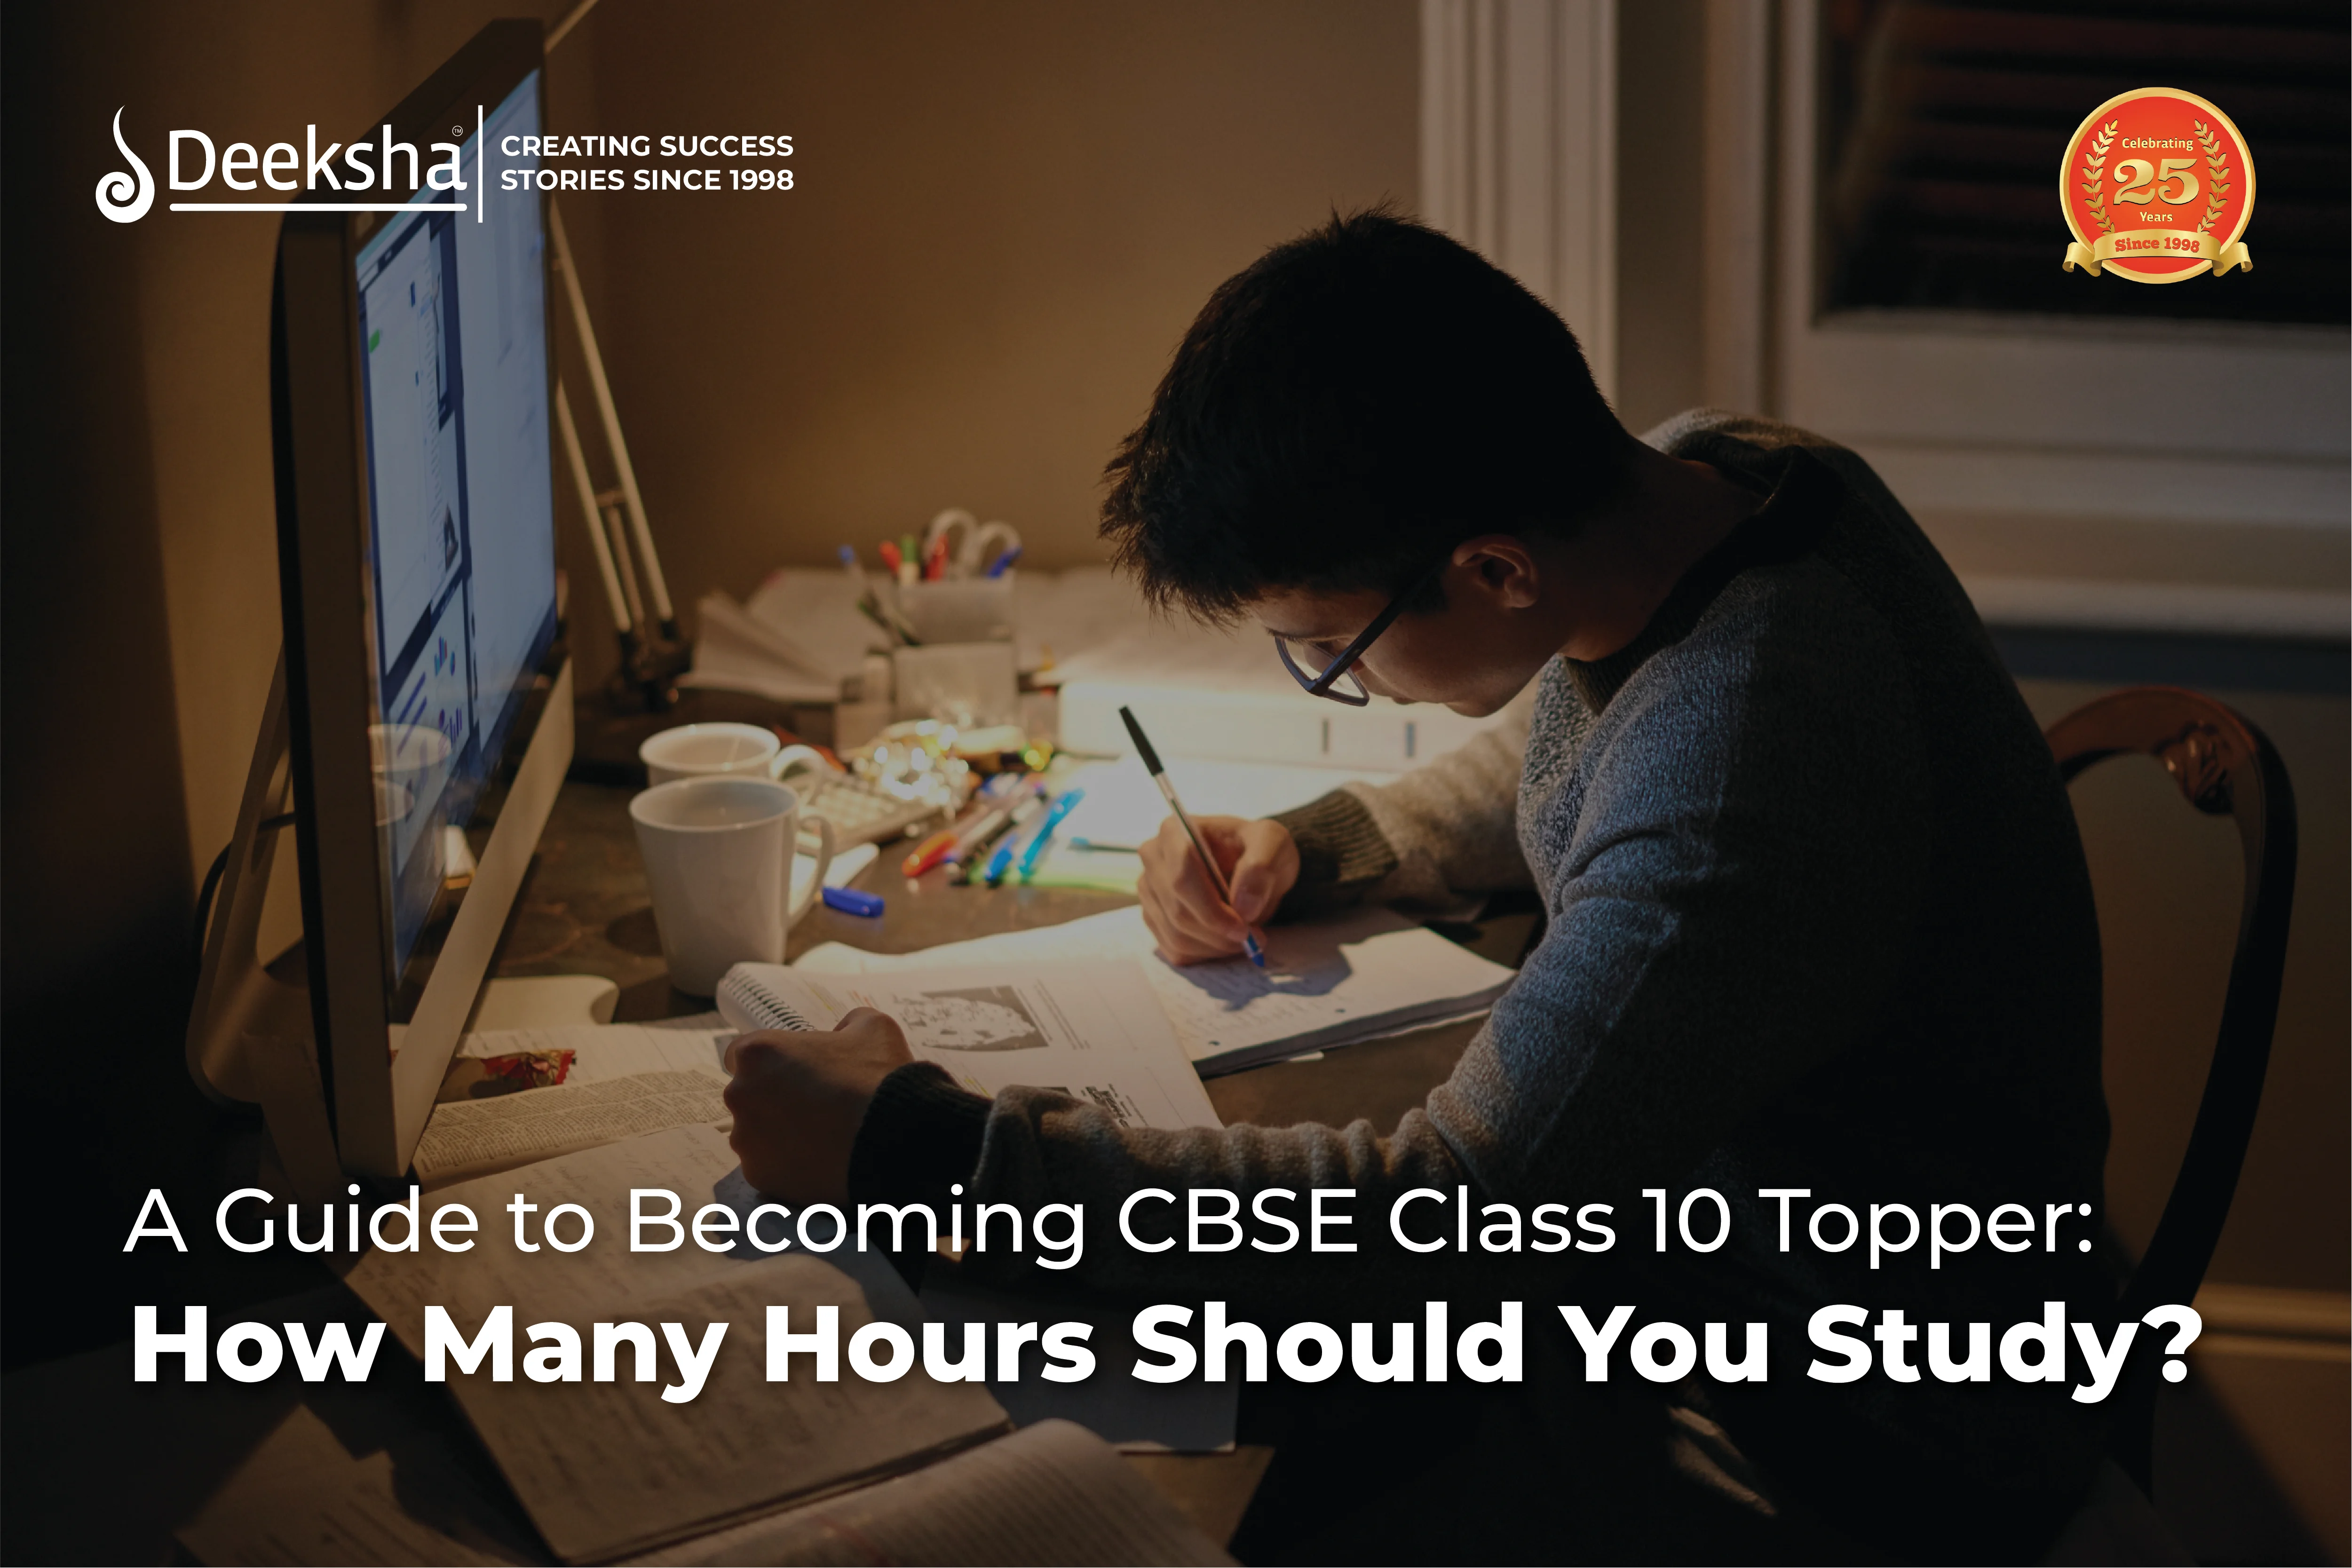 A Guide to Becoming CBSE Class 10 Topper How Many Hours Should You Study